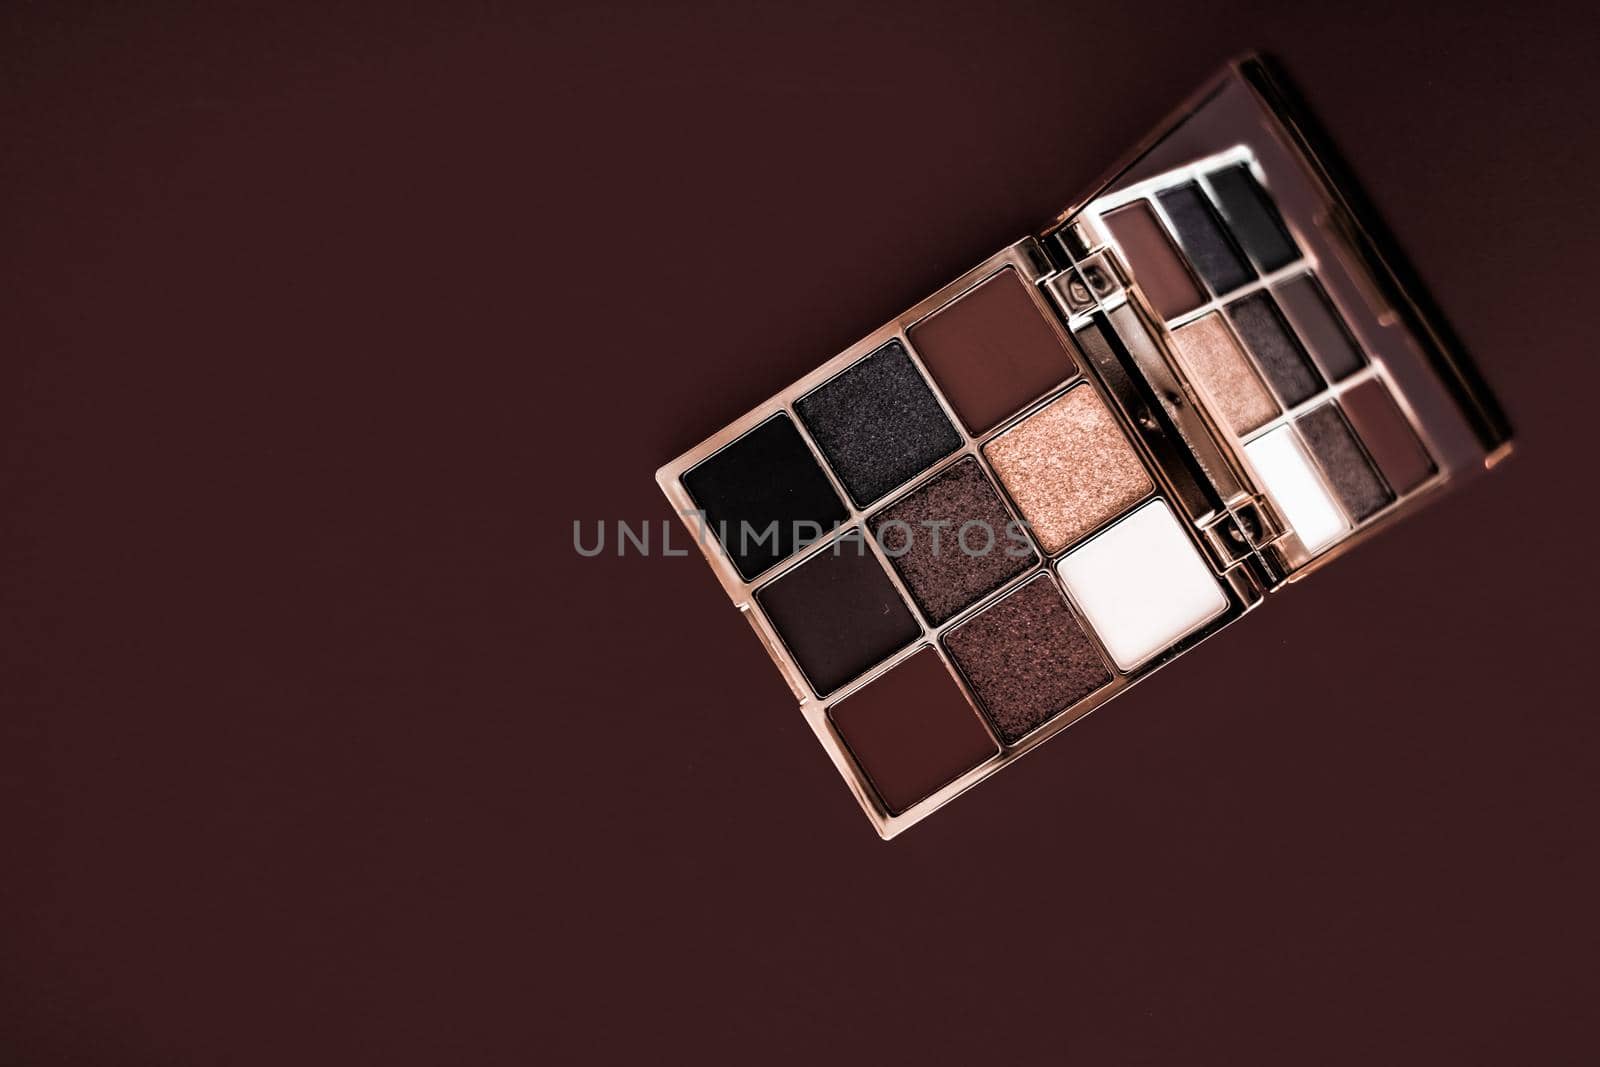 Eyeshadow palette and make-up brush on chocolate background, eye shadows cosmetics product for luxury beauty brand promotion and holiday fashion blog design by Anneleven